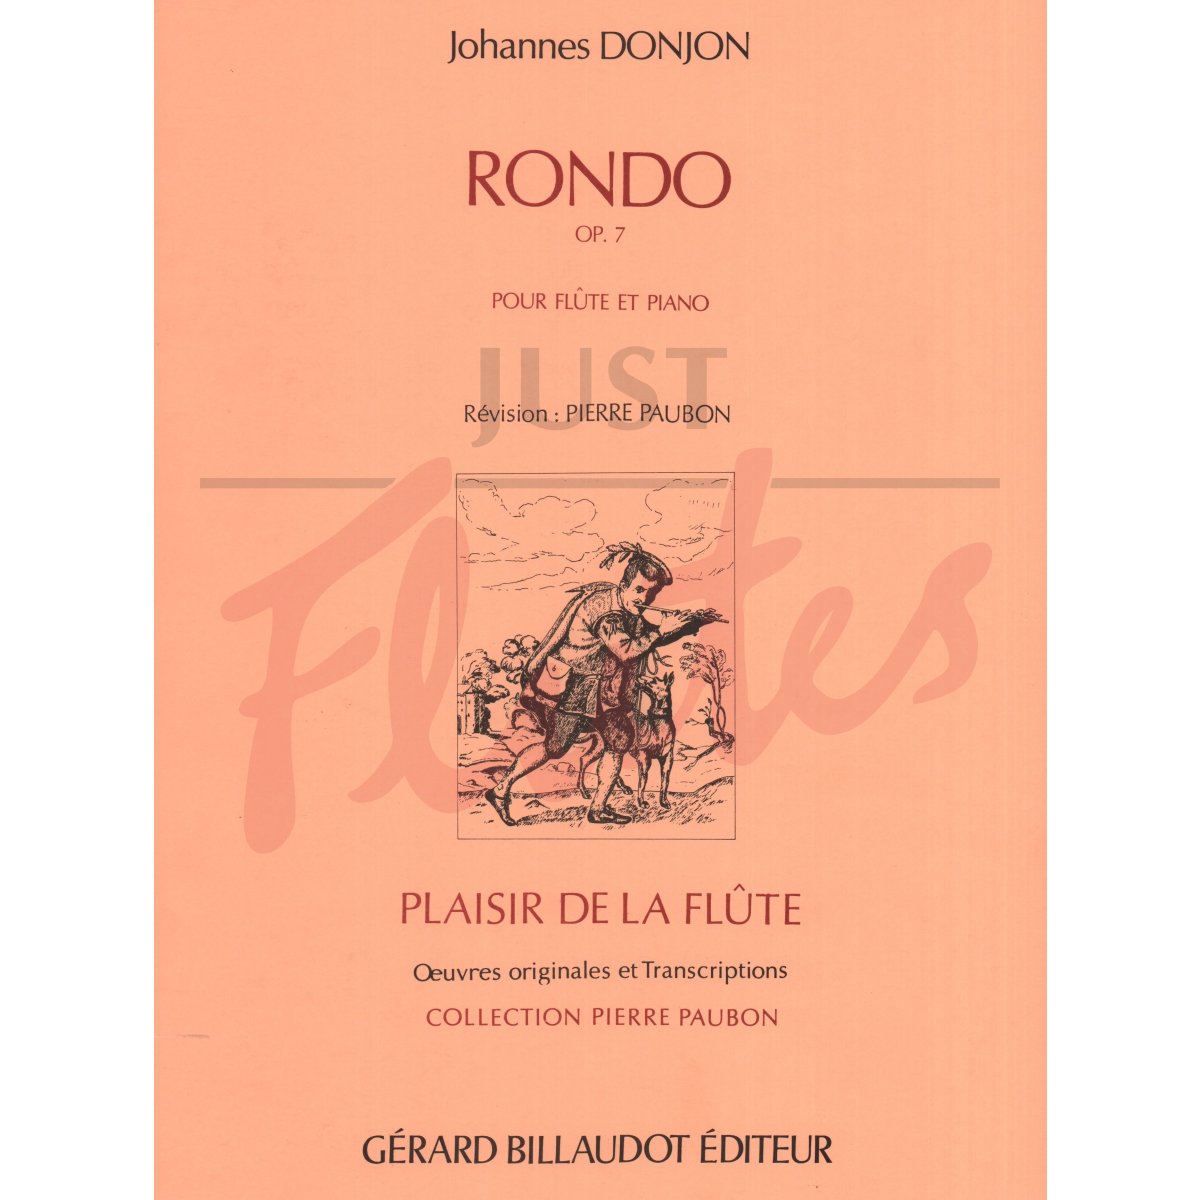 Rondo for Flute and Piano